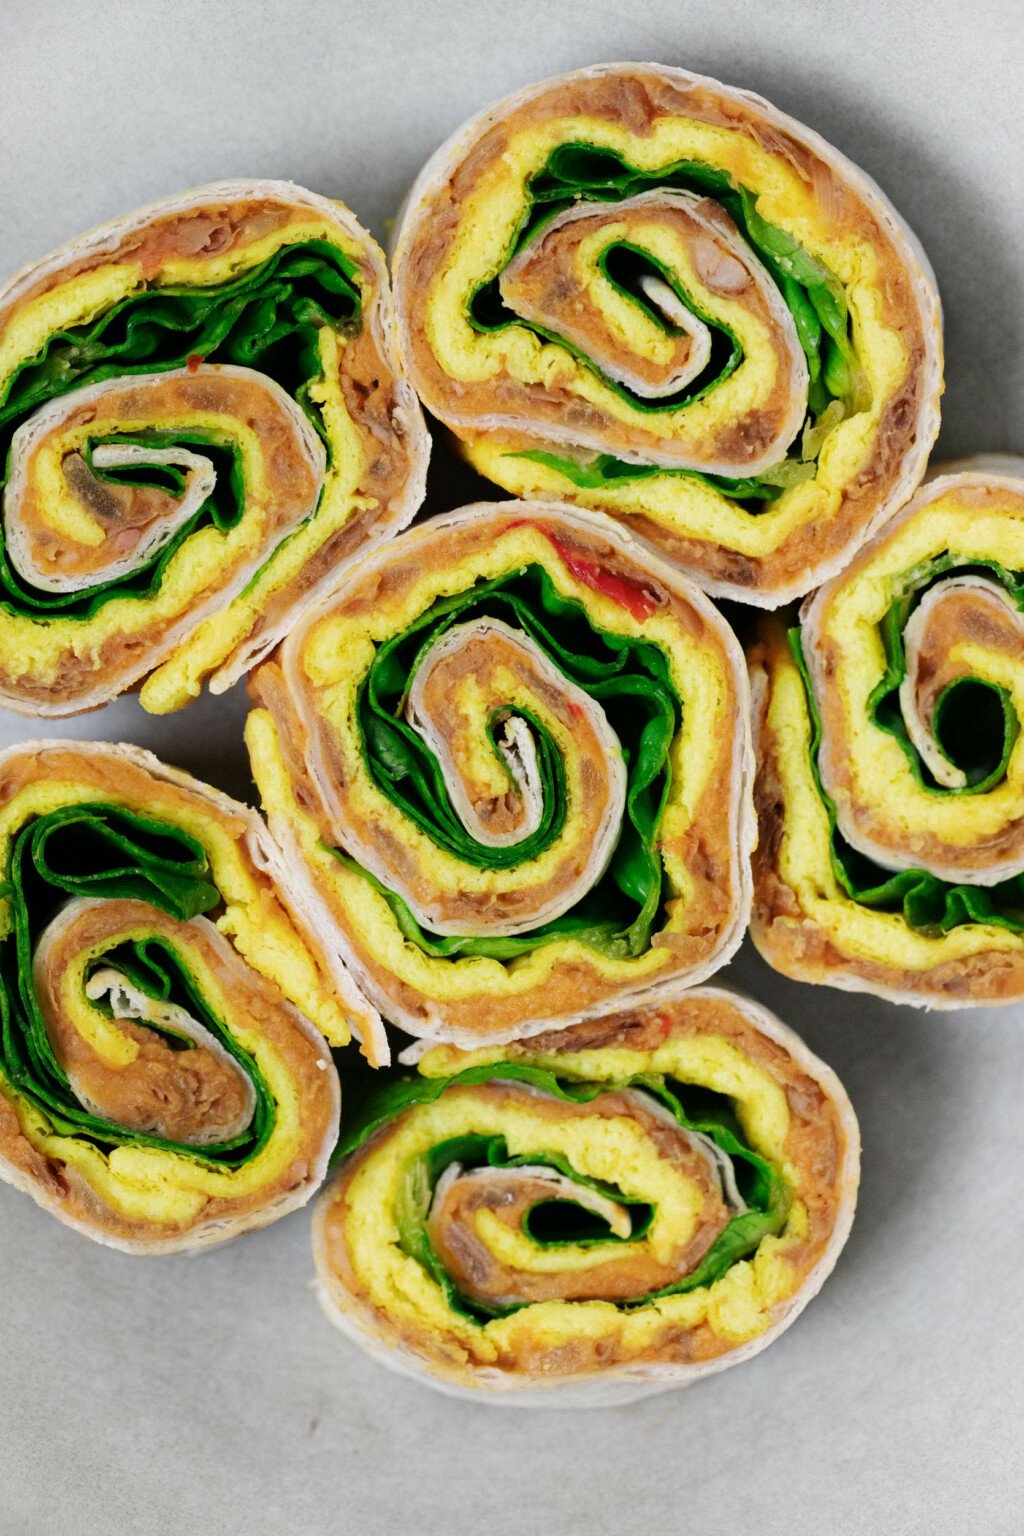 A cross-section of colorful vegan breakfast pinwheels, made with refried beans, tofu, and greens.